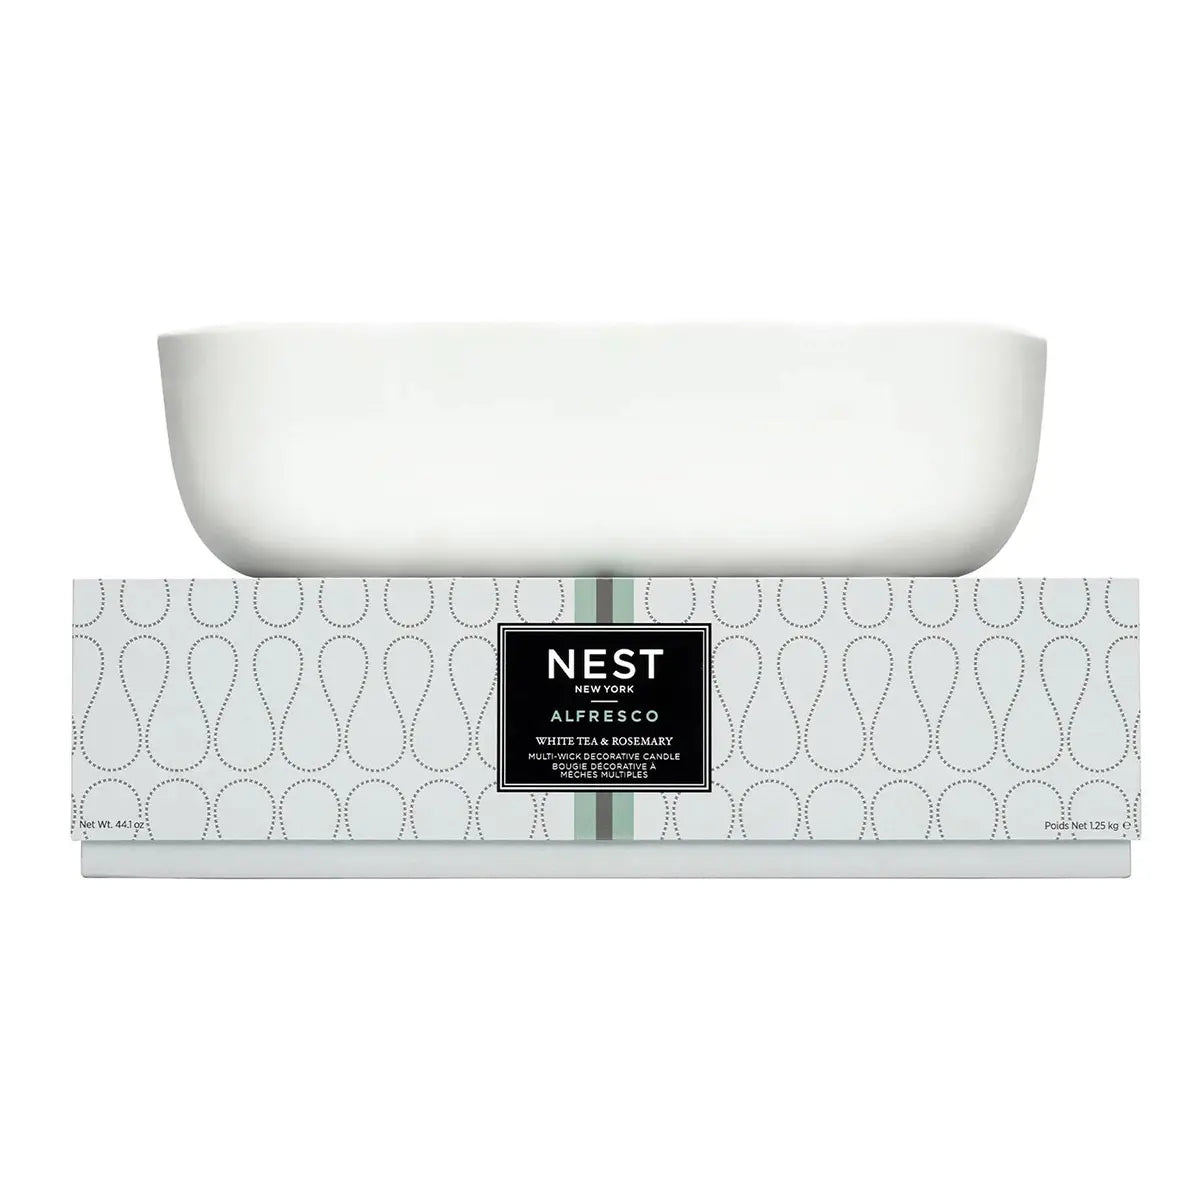 Nest Fragrances White Tea and Rosemary Multi-Wick Decorative Candle 44.1 ounce